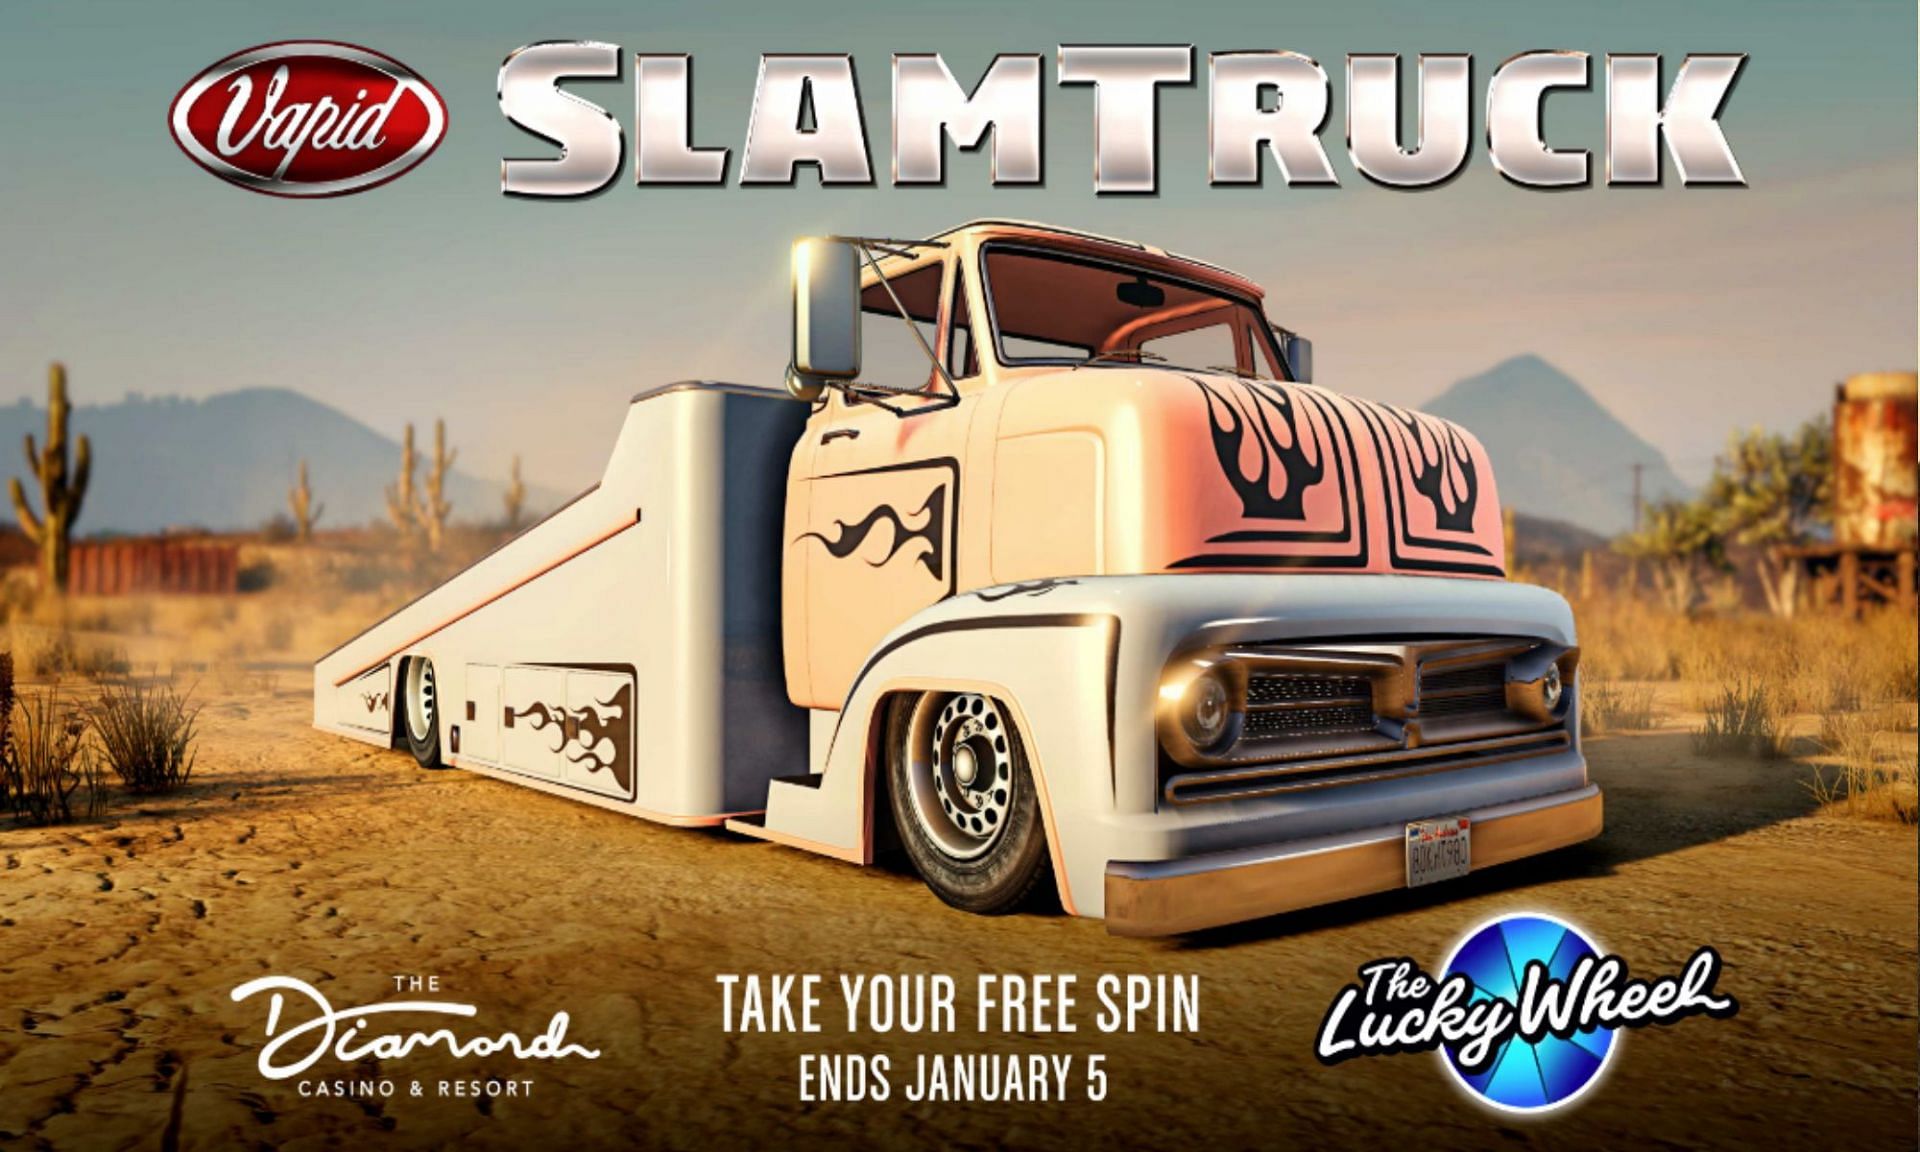 Take a free spin this week for a chance to win the Vapid Slamtruck (Image via Rockstar Games)